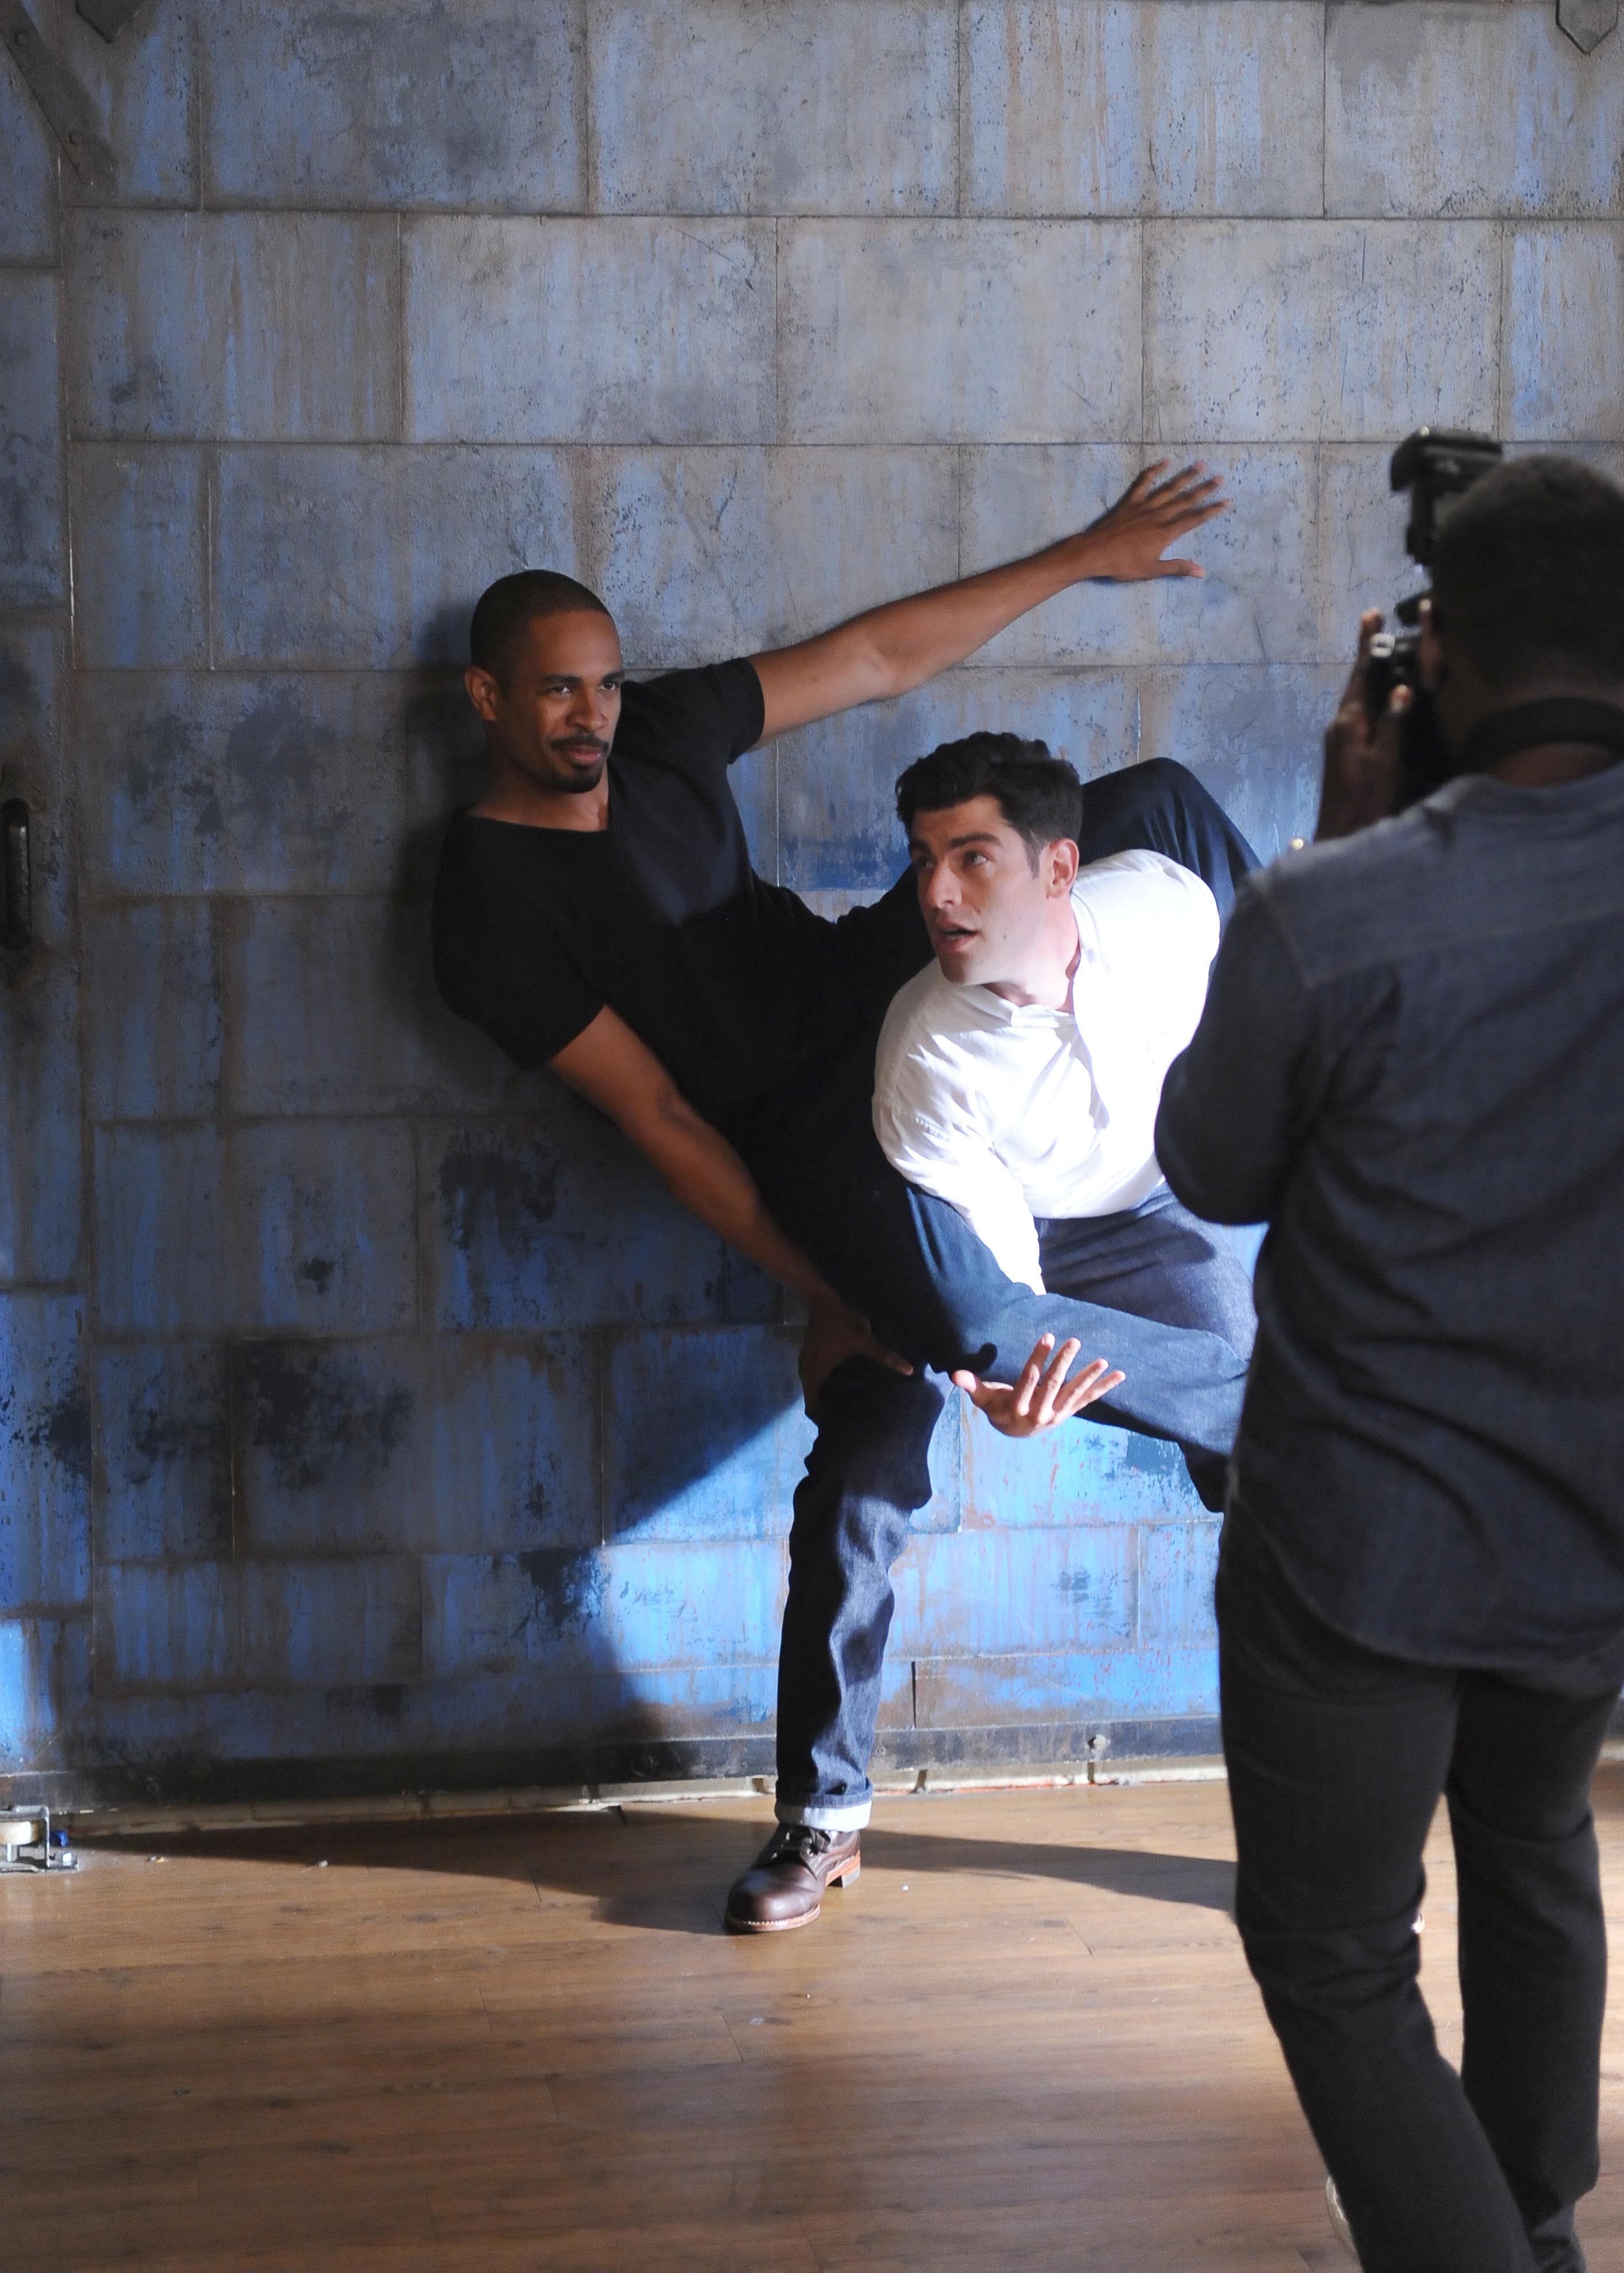 Still of Max Greenfield and Damon Wayans Jr. in New Girl (2011)